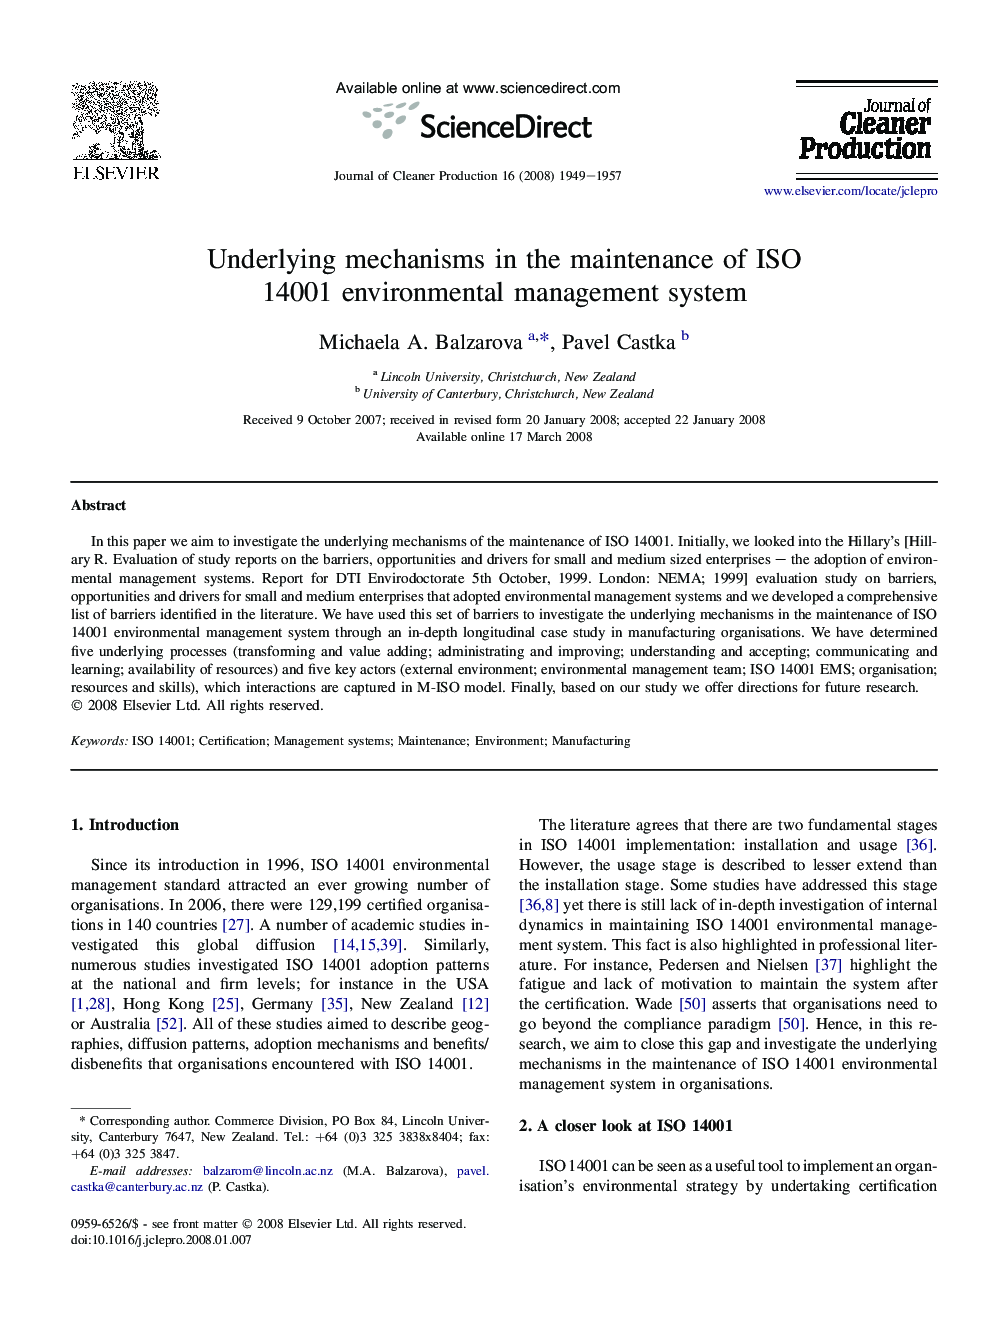 Underlying mechanisms in the maintenance of ISO 14001 environmental management system